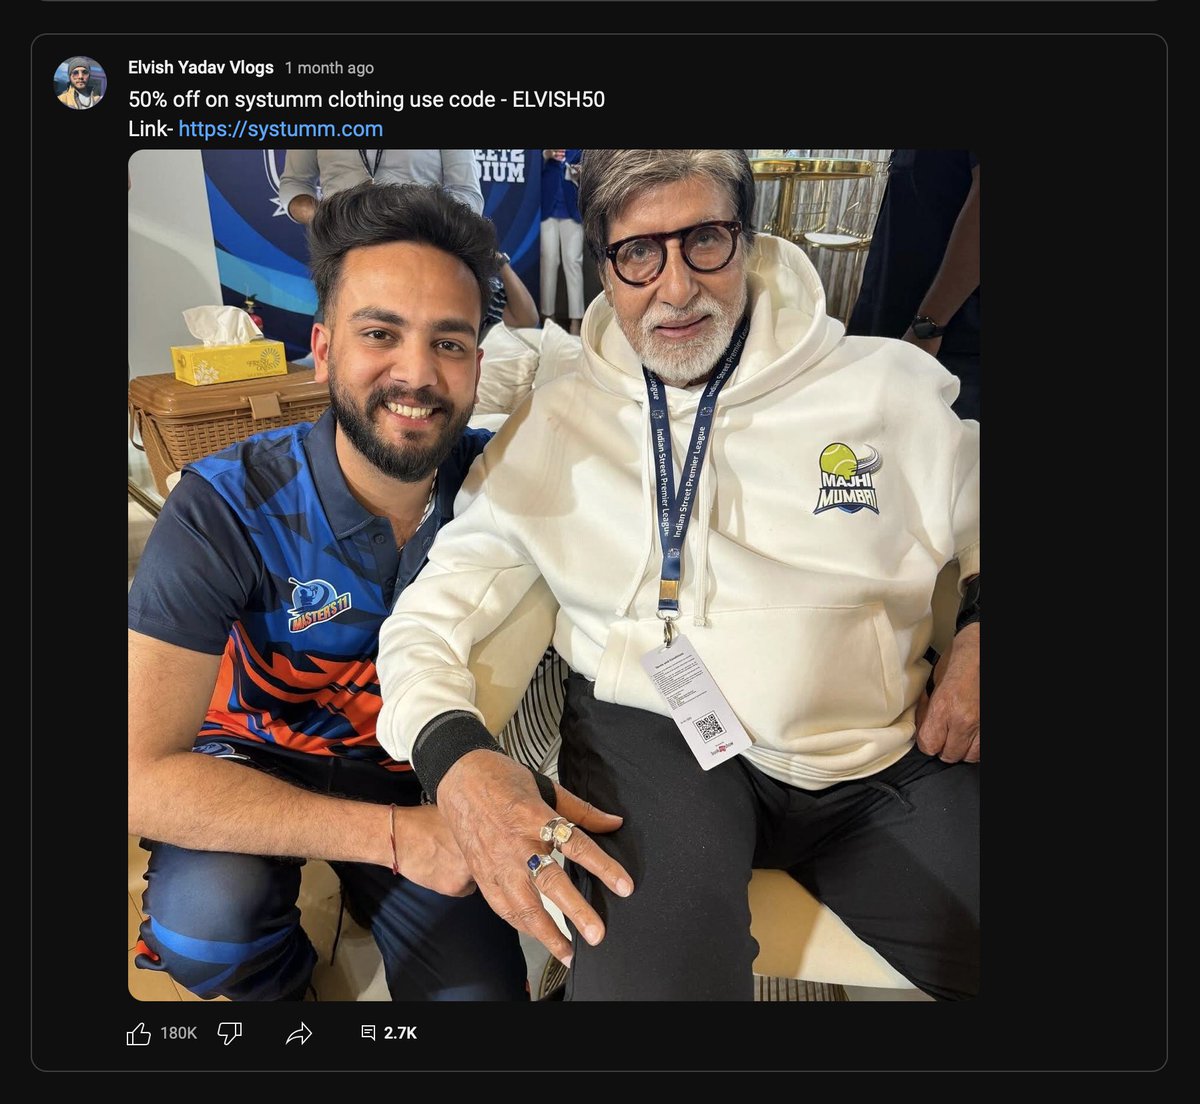 My new video on this guy and his #systummarmy only proves my point even more, especially in the #ManishaRani segment...

No wonder she was right...

I mean wtf is this BS? You took a pic with @SrBachchan and ended up endorsing your clothing brand over meeting him in the caption?